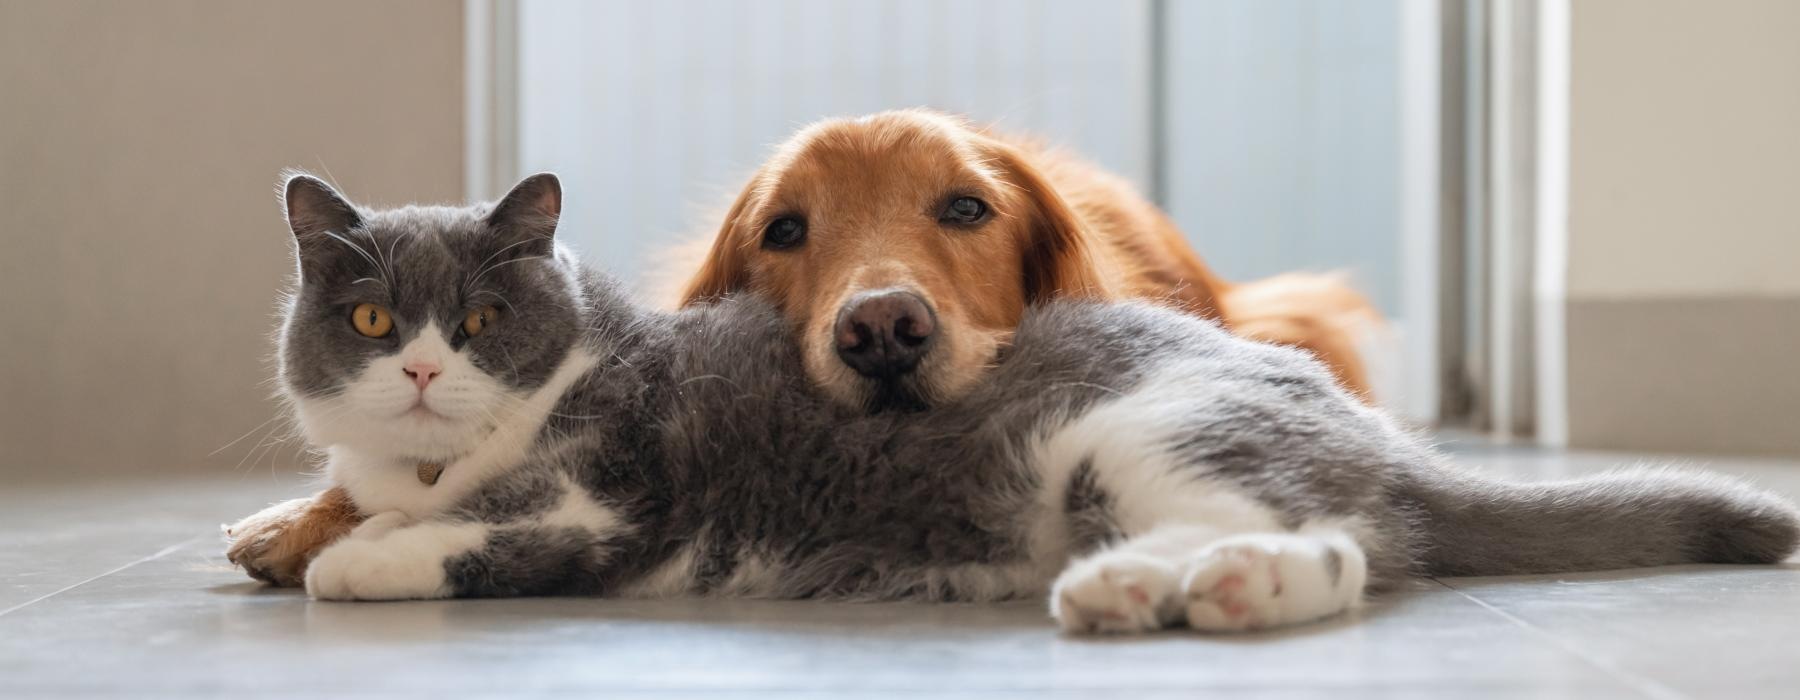 a dog and a cat lying on the floor